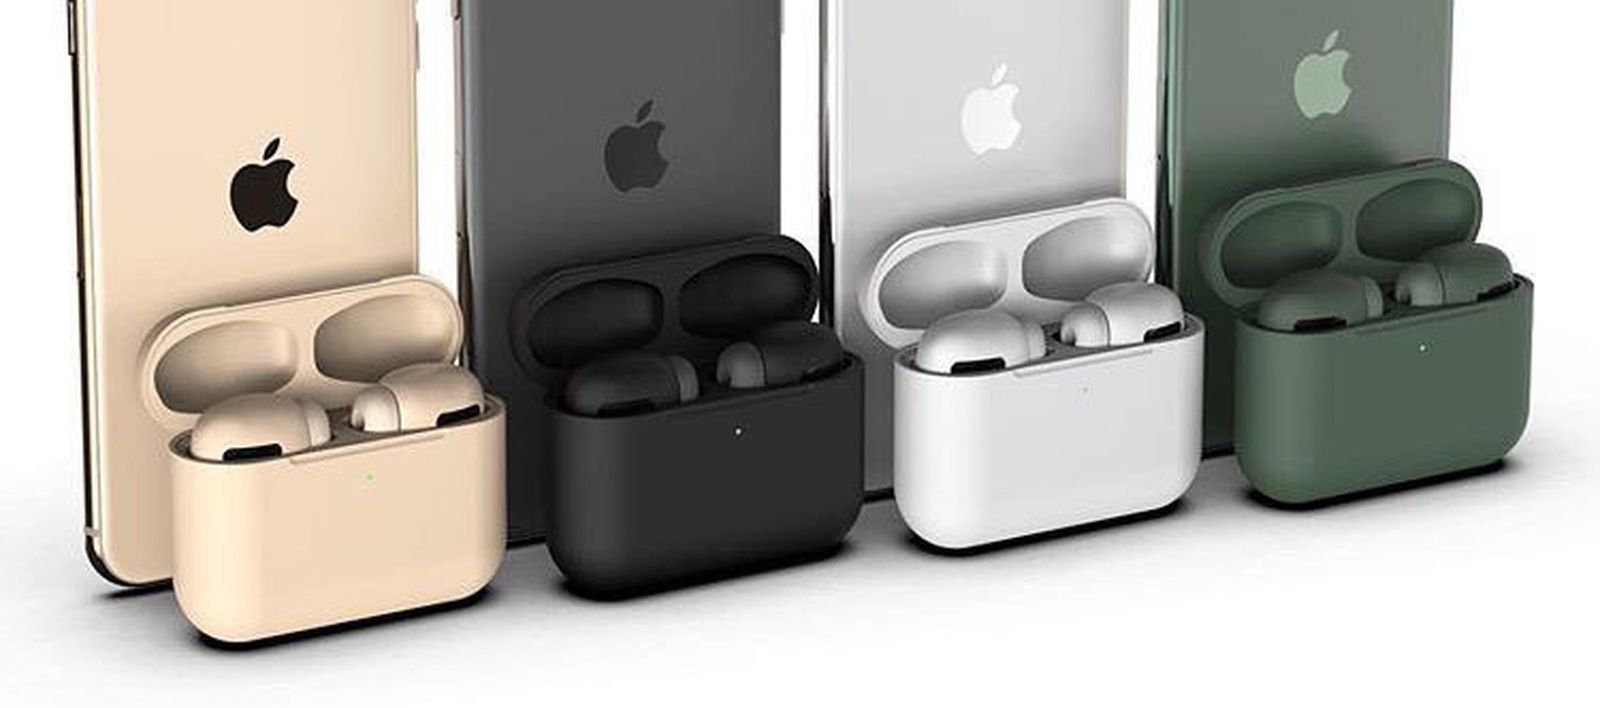 AirPods Pro to Feature New Colors, Including Black and Midnight Green